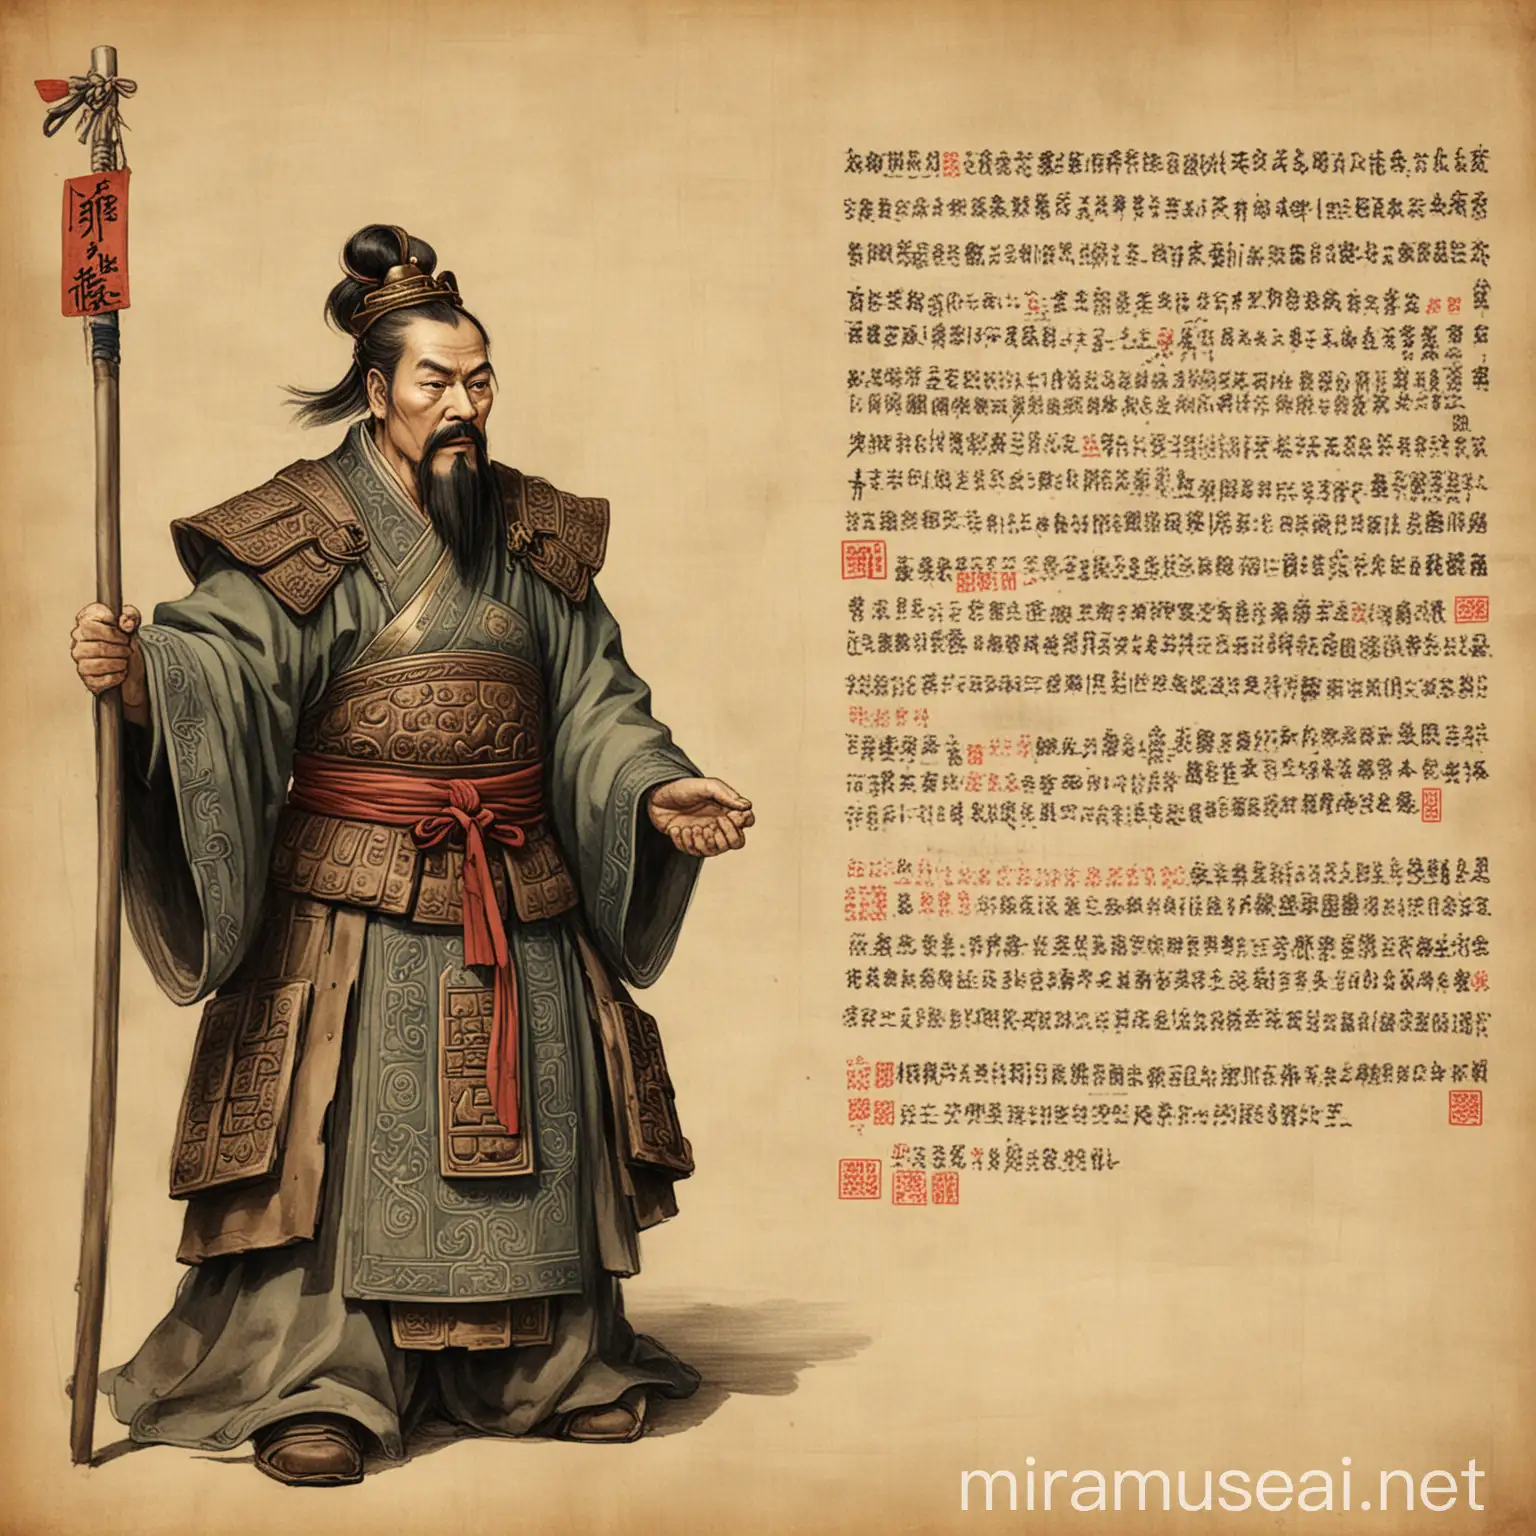 Relevance:

Ensure the image is relevant to the content. For example, you could use an image related to Sun Tzu, ancient Chinese manuscripts, or a modern sales strategy.
Quality:

Use high-quality images that are clear and visually appealing.
Placement:

Place the image at a natural break in the text, such as between two sections or after a particularly dense paragraph.
Caption:

Add a brief caption to explain the image and its relevance to the text.
Alignment:

Align the image to the left or right and let the text wrap around it, or center it if it’s large. This helps maintain the flow of reading.
Example of Image Placement:
In your article, you could place an image after discussing Sun Tzu's background and before transitioning to modern sales applications. Here's a rough example:

